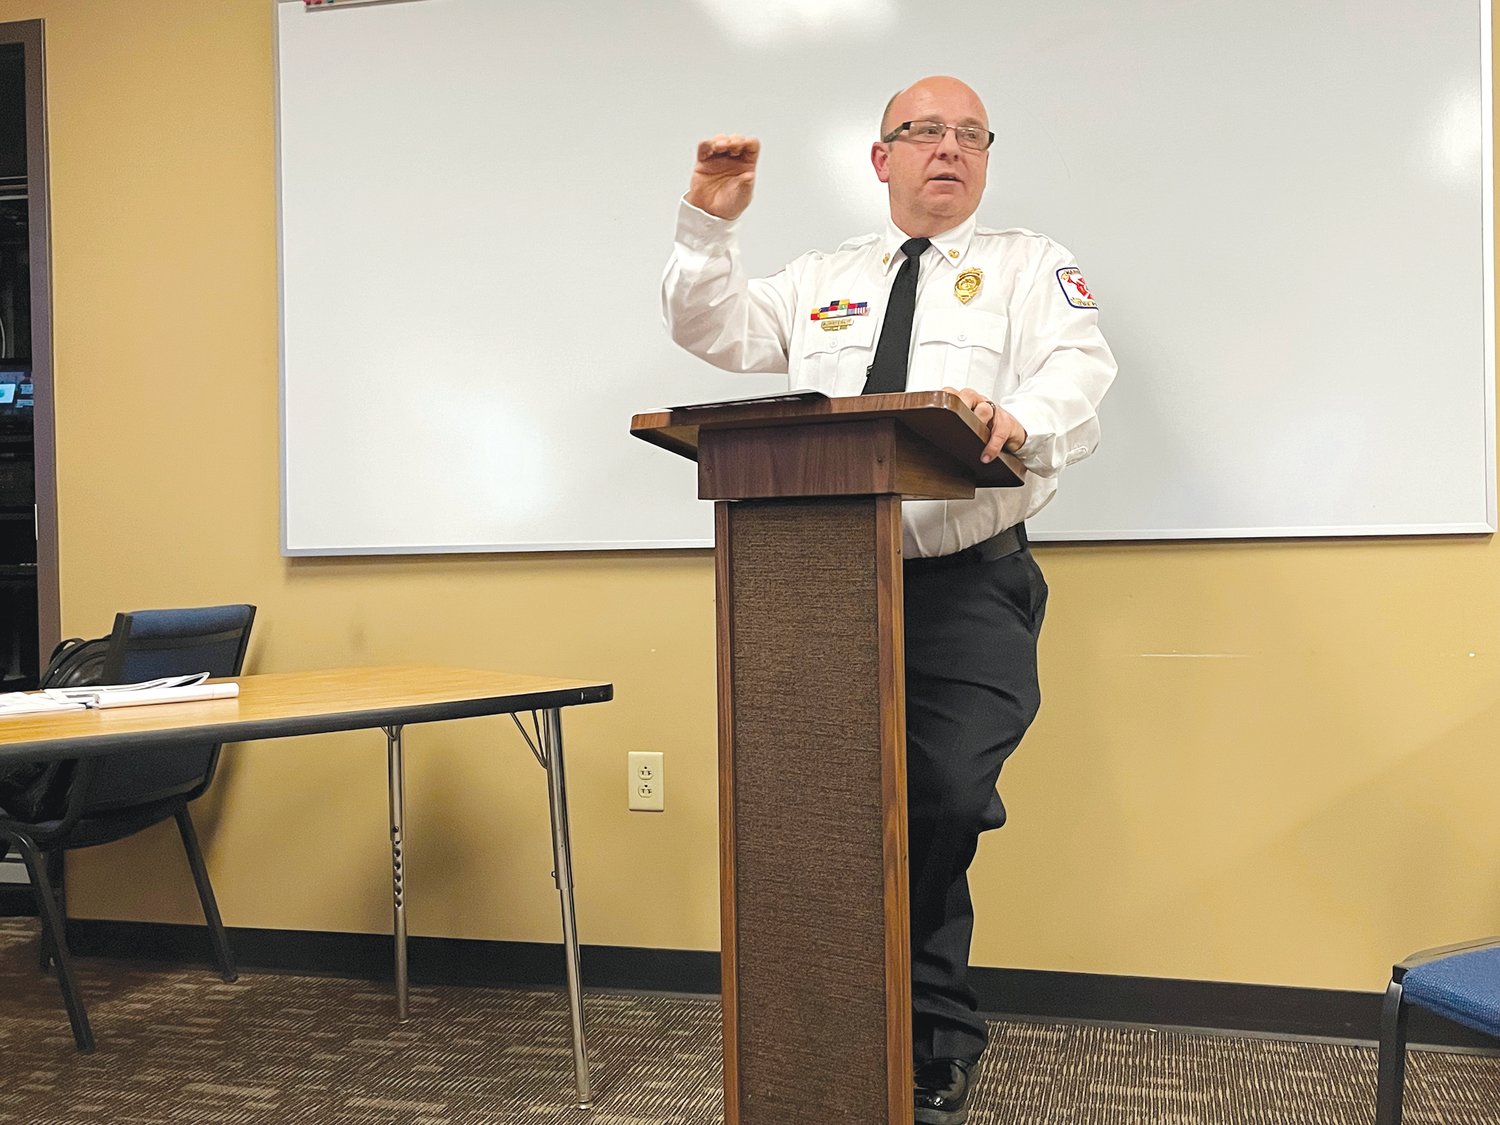 TOWN HALL MEETING — Warrenton Fire Chief Anthony Hayeslip speaks during a town hall meeting held last week about the district’s upcoming $10 million bond issue voters will decide on April 4.